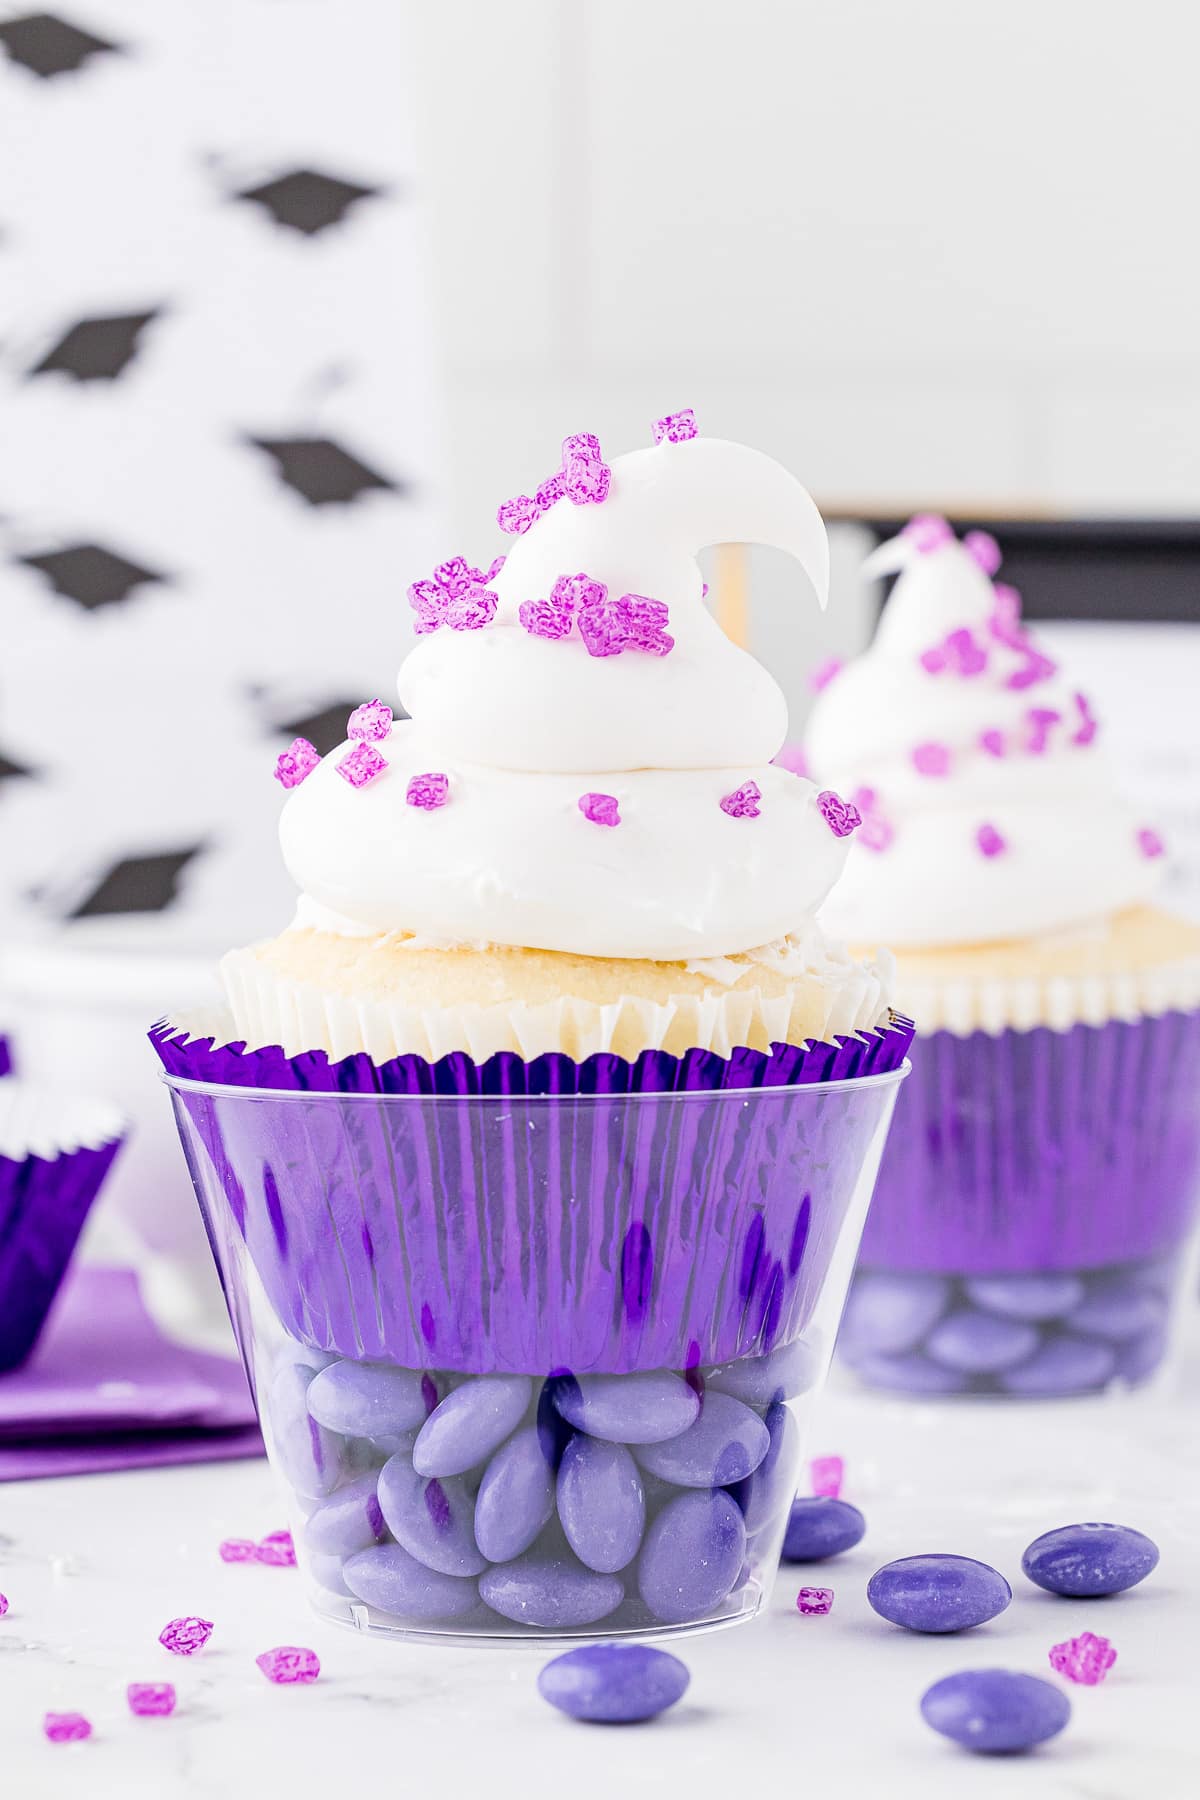 A cupcake in a purple foil wrapper sitting in a clear plastic cup on top of purple M&Ms topped with white frosting and sugar sprinkles